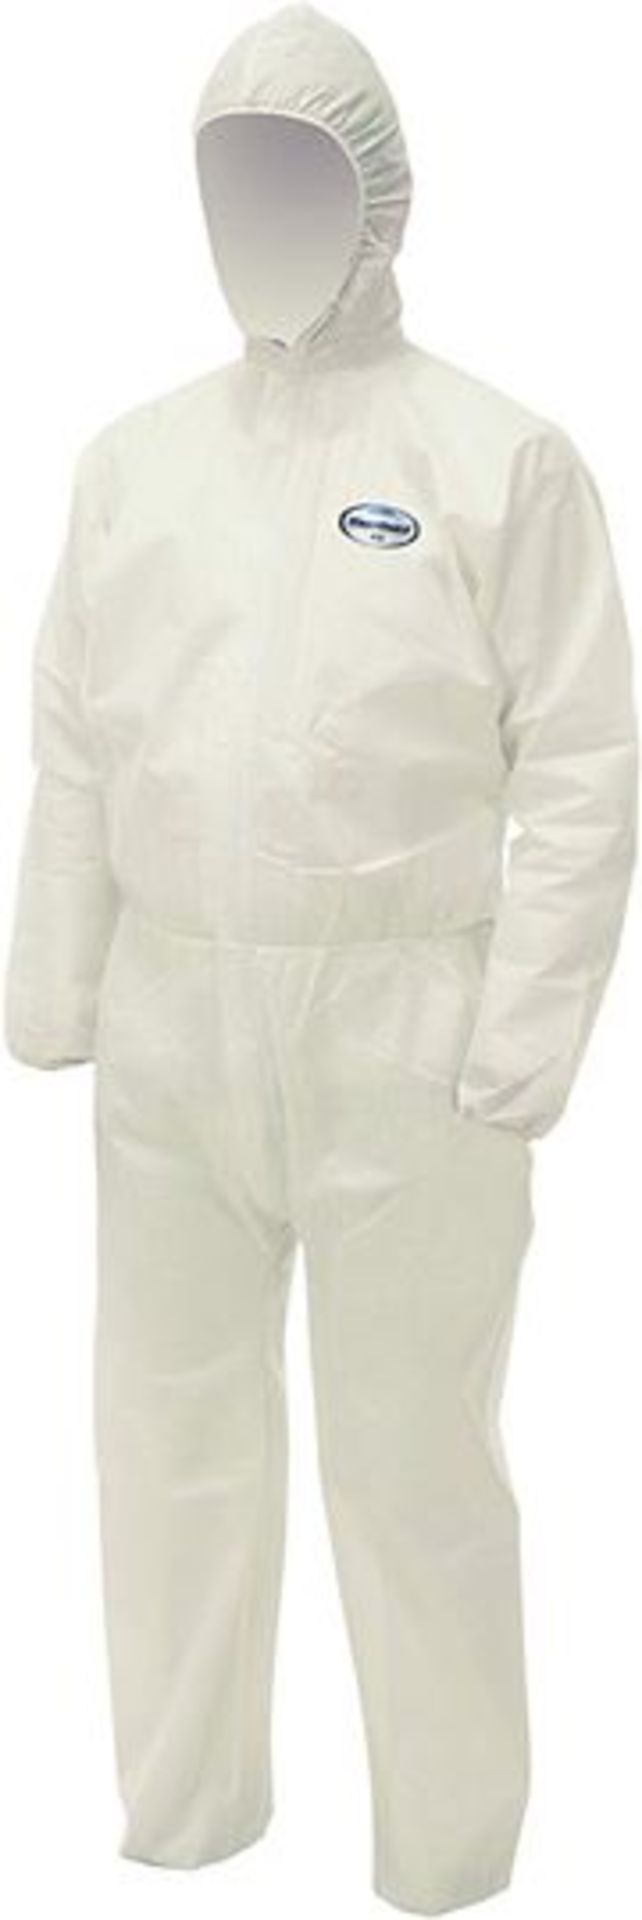 6 X Kimberly Clark Protective Suit A50 With Hood Breathable,1 X Medium 2 X Large 3 X X Large - Image 2 of 2